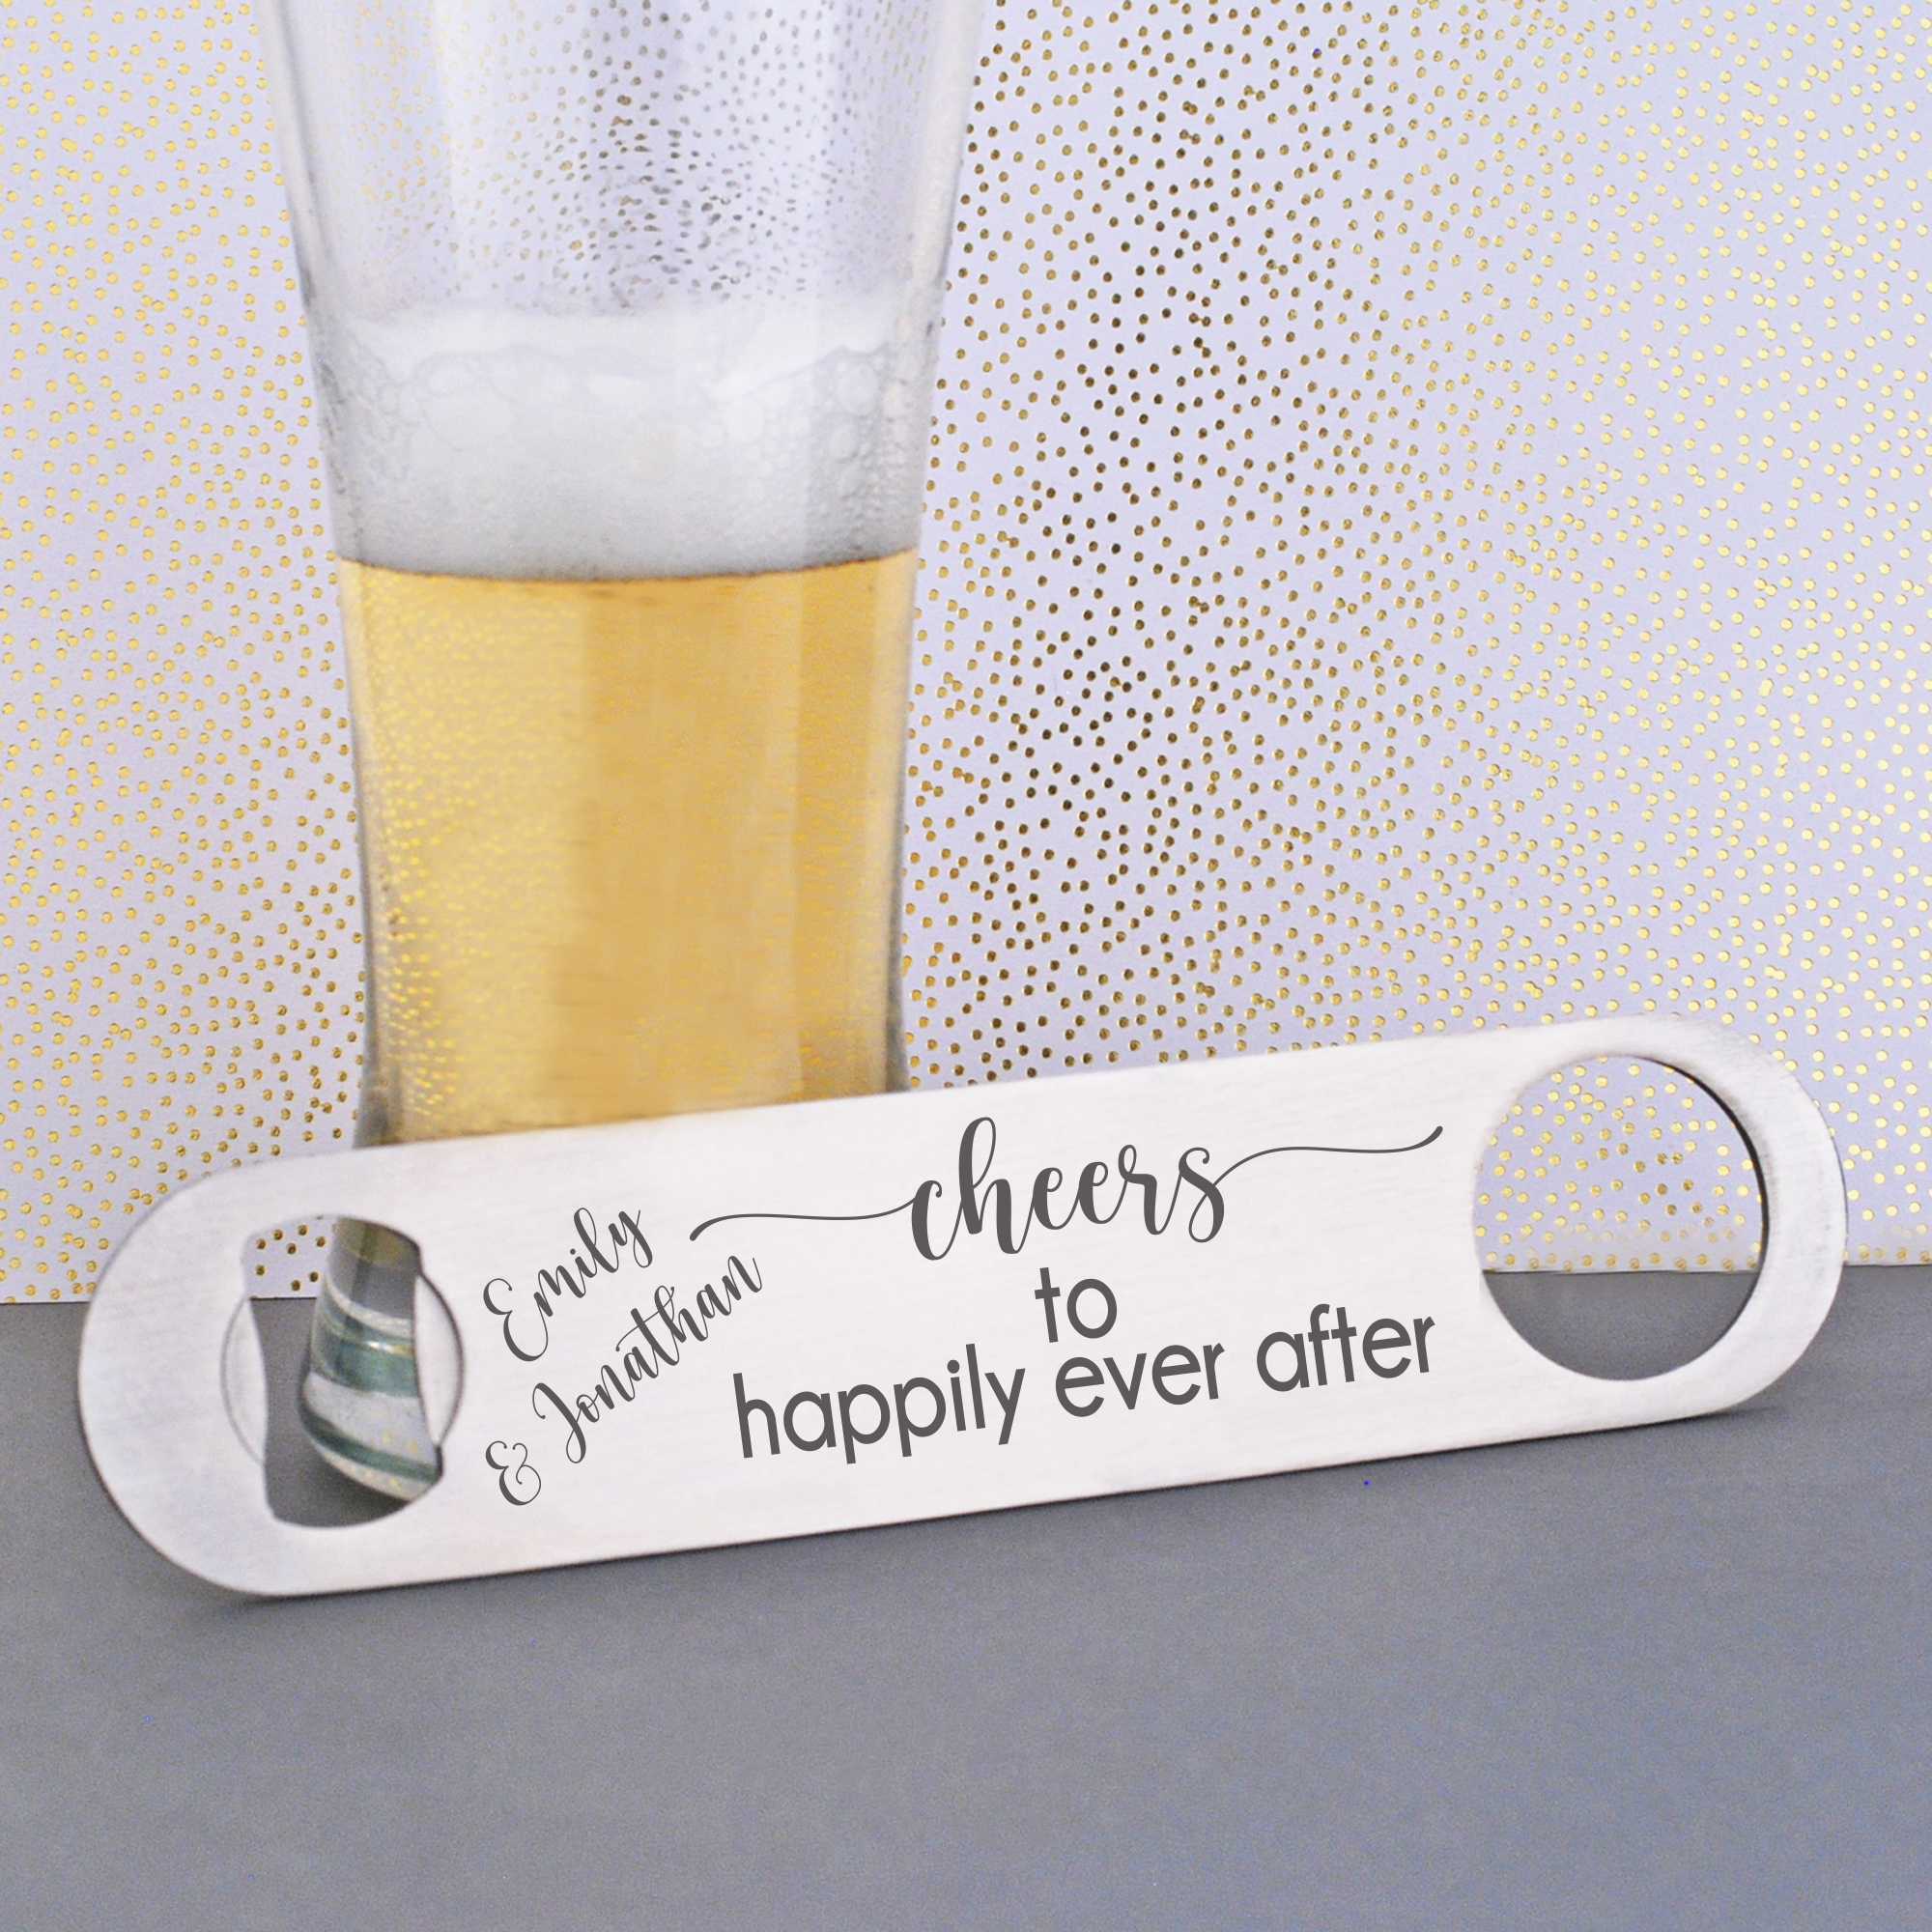 Cheers to Happily Ever After - Bottle Opener